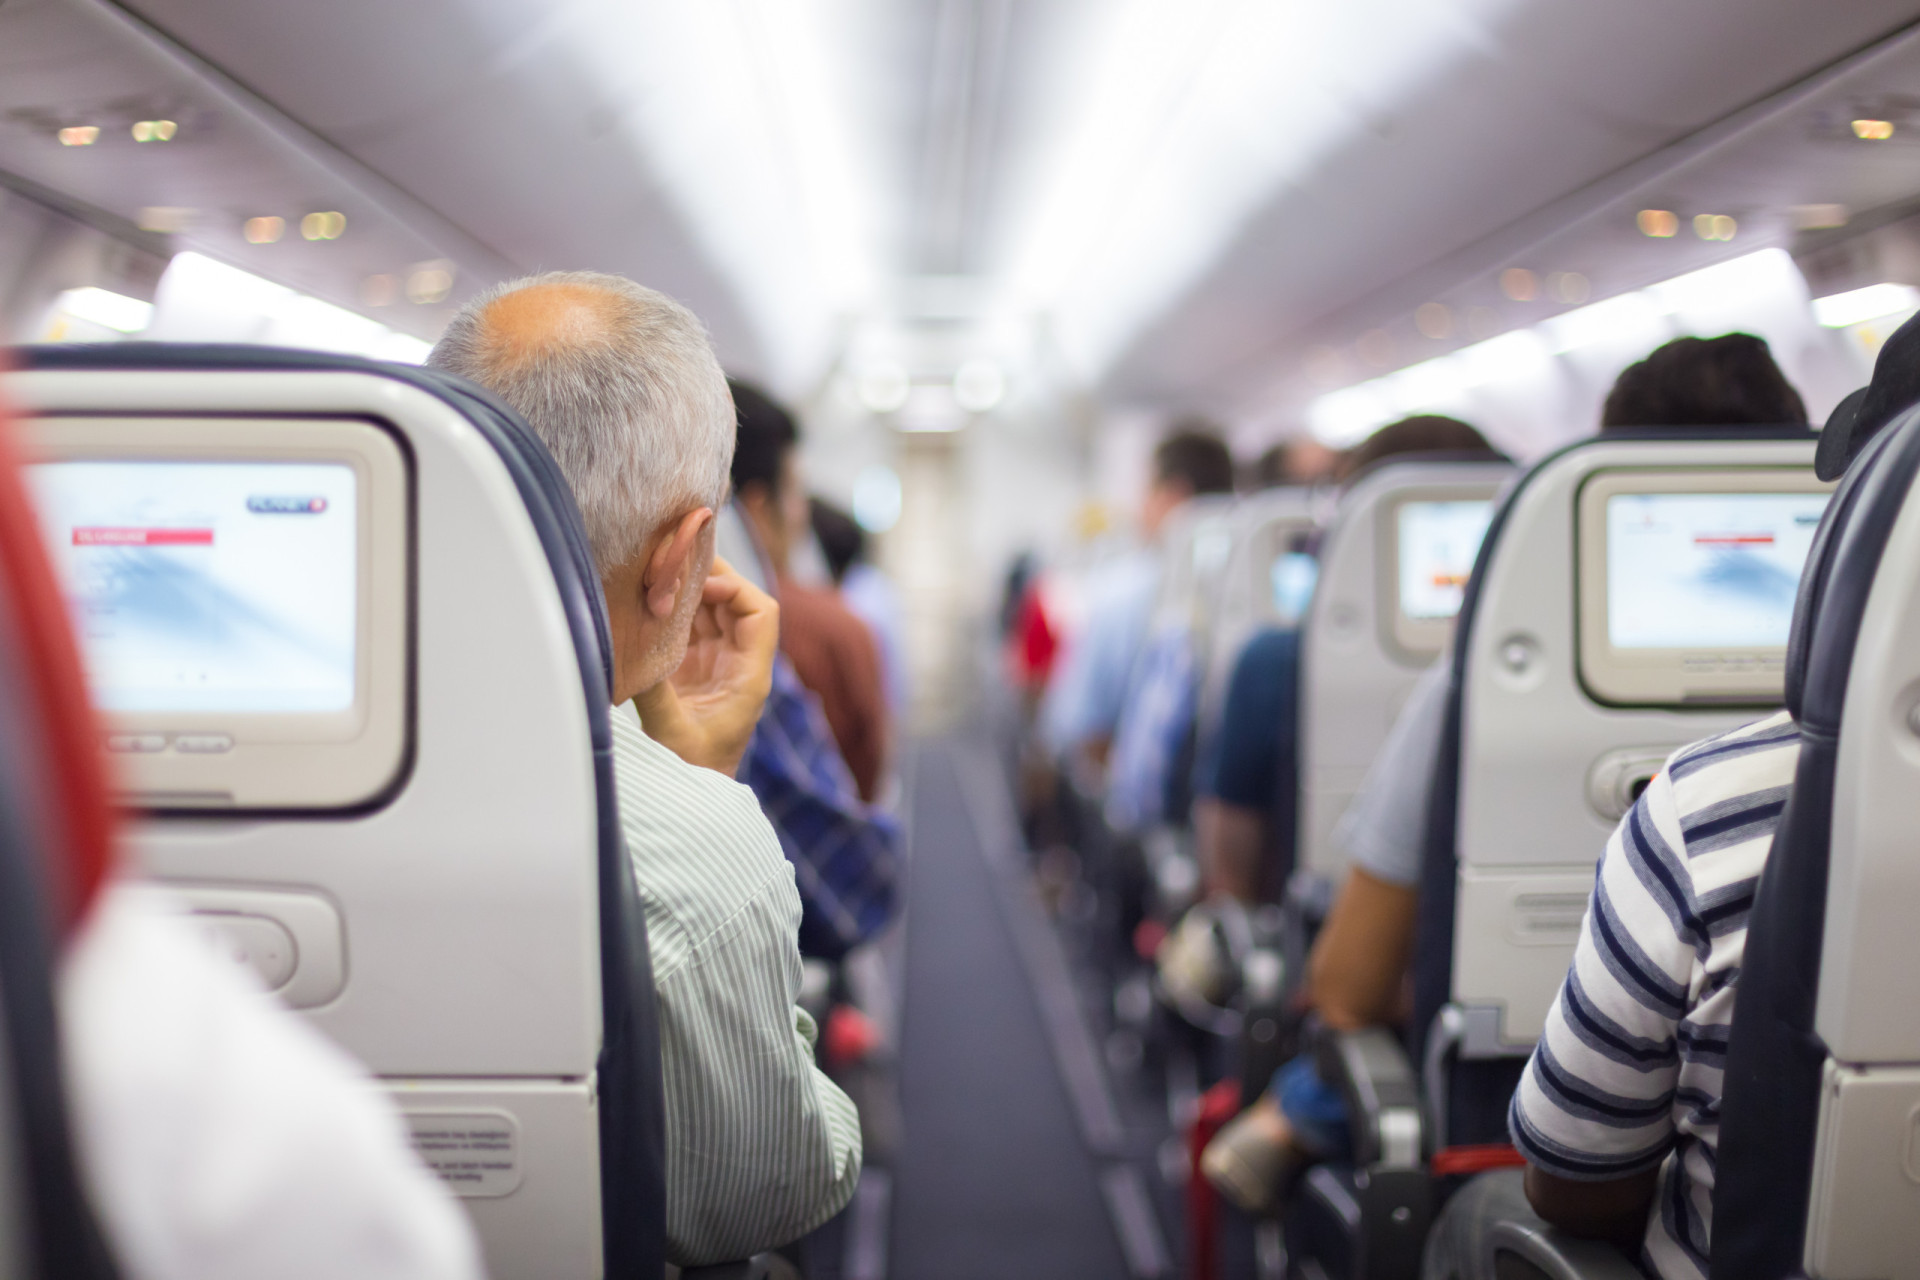 <p>Whether you're embarking on an eight-hour <a href="https://www.starsinsider.com/travel/491120/things-you-should-never-do-on-an-airplane" rel="noopener">flight</a> or a lengthy 20-hour journey, long-haul flights can be boring, uncomfortable, and exhausting. Sometimes long-haul travel can perhaps become super inconvenient with annoying passengers, or even dangerous due to deep-vein thrombosis. Not only does a poorly planned journey ruin your flight, but also the days that follow.</p> <p>If you want to make your long-haul flight infinitely more bearable, click through the following gallery for some essential tips.</p><p>You may also like:<a href="https://www.starsinsider.com/n/144142?utm_source=msn.com&utm_medium=display&utm_campaign=referral_description&utm_content=500296v1en-us"> Hideous creatures in films that are actually beautiful actresses</a></p>